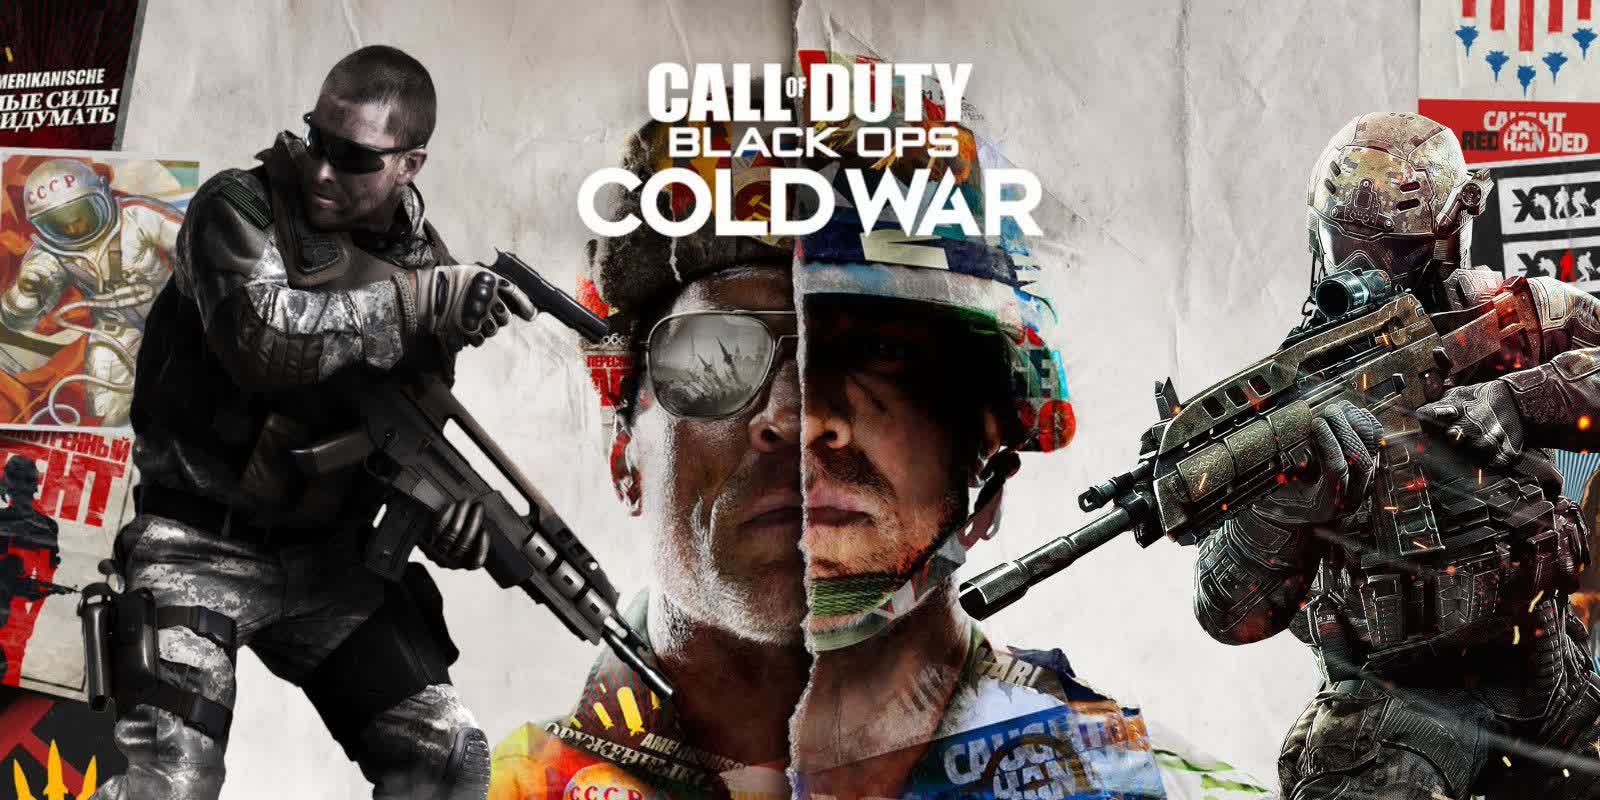 Check out the new story trailer for Call of Duty: Black Ops Cold War